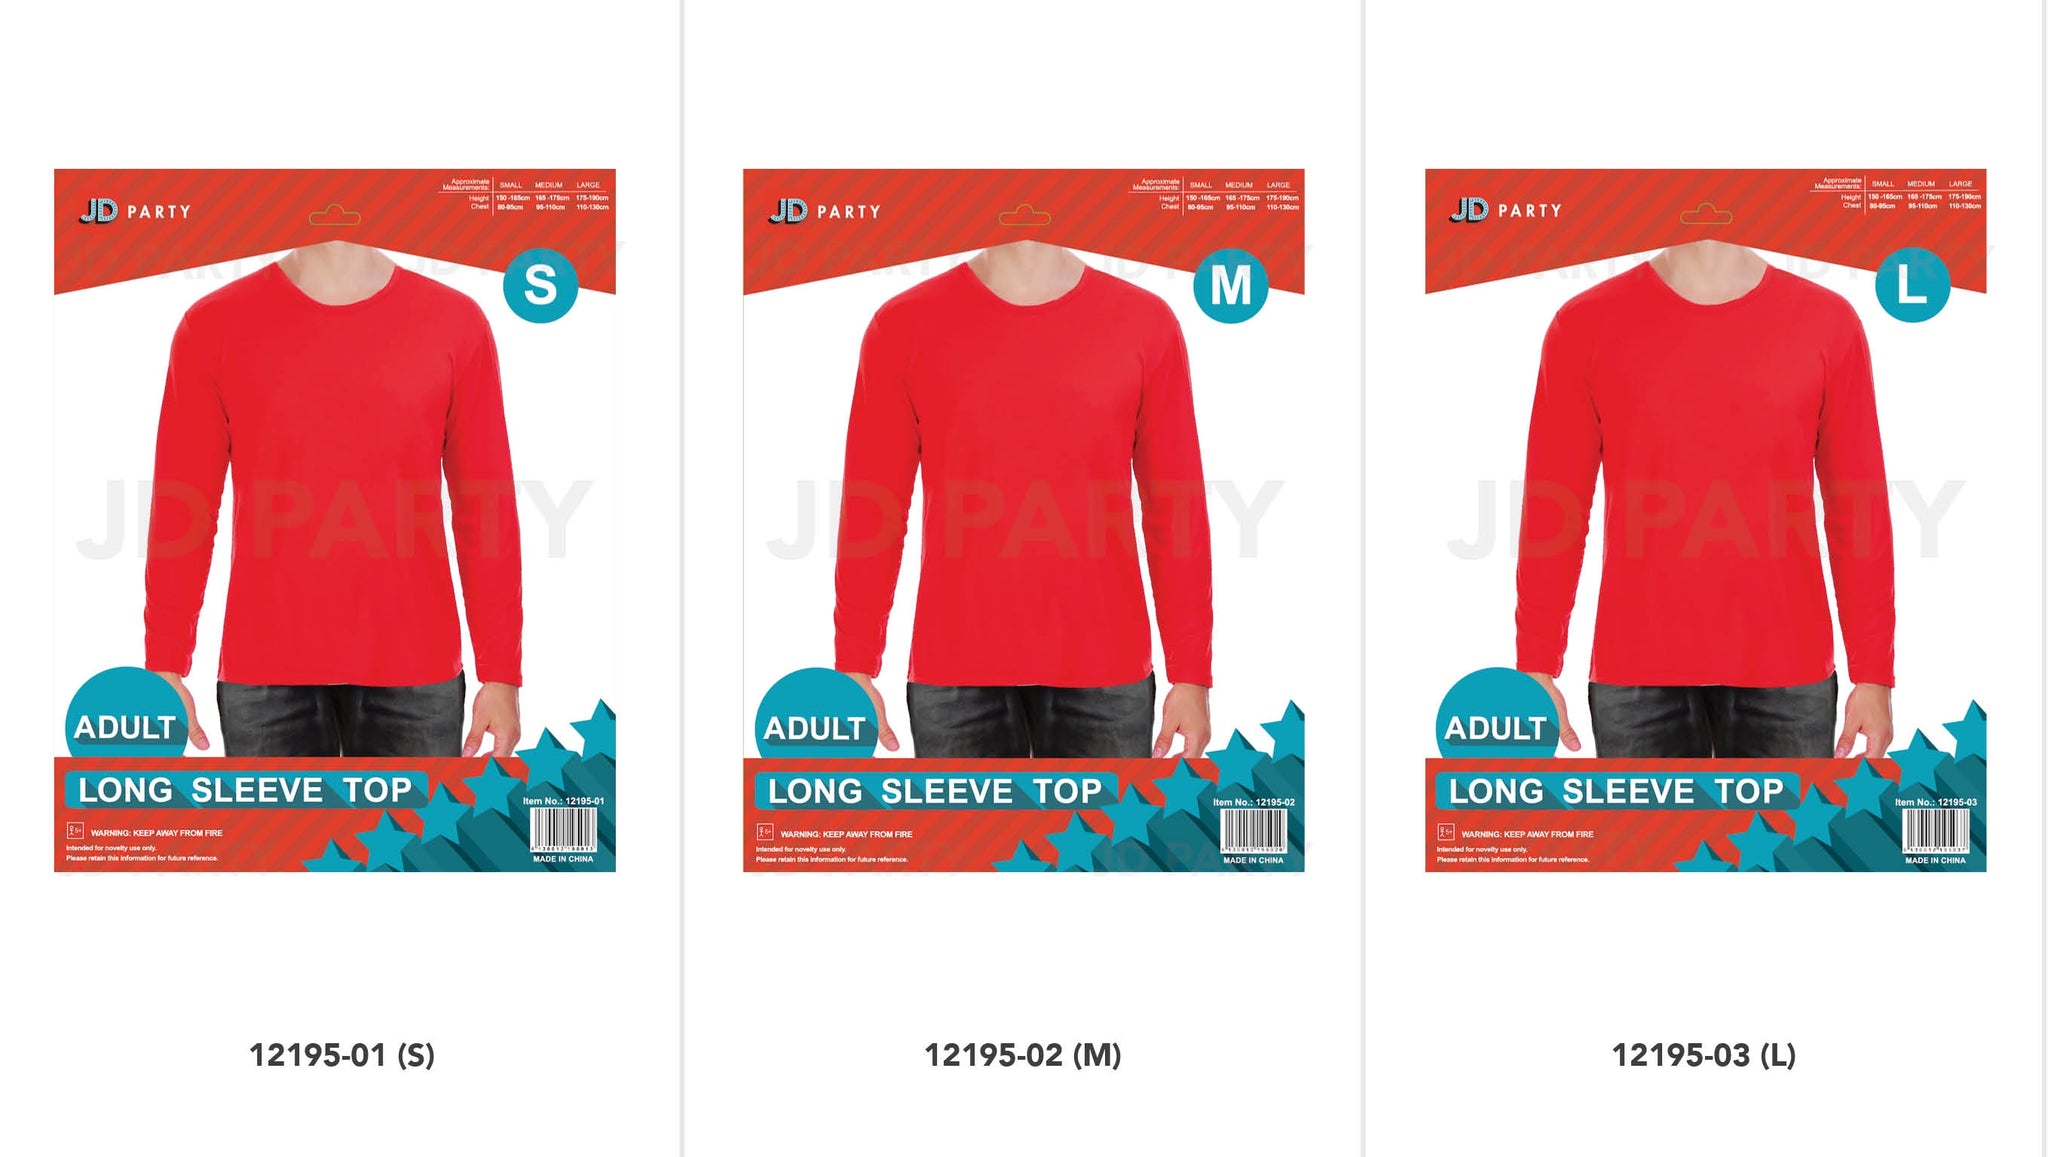 Adult Long Sleeve Top (M) Red